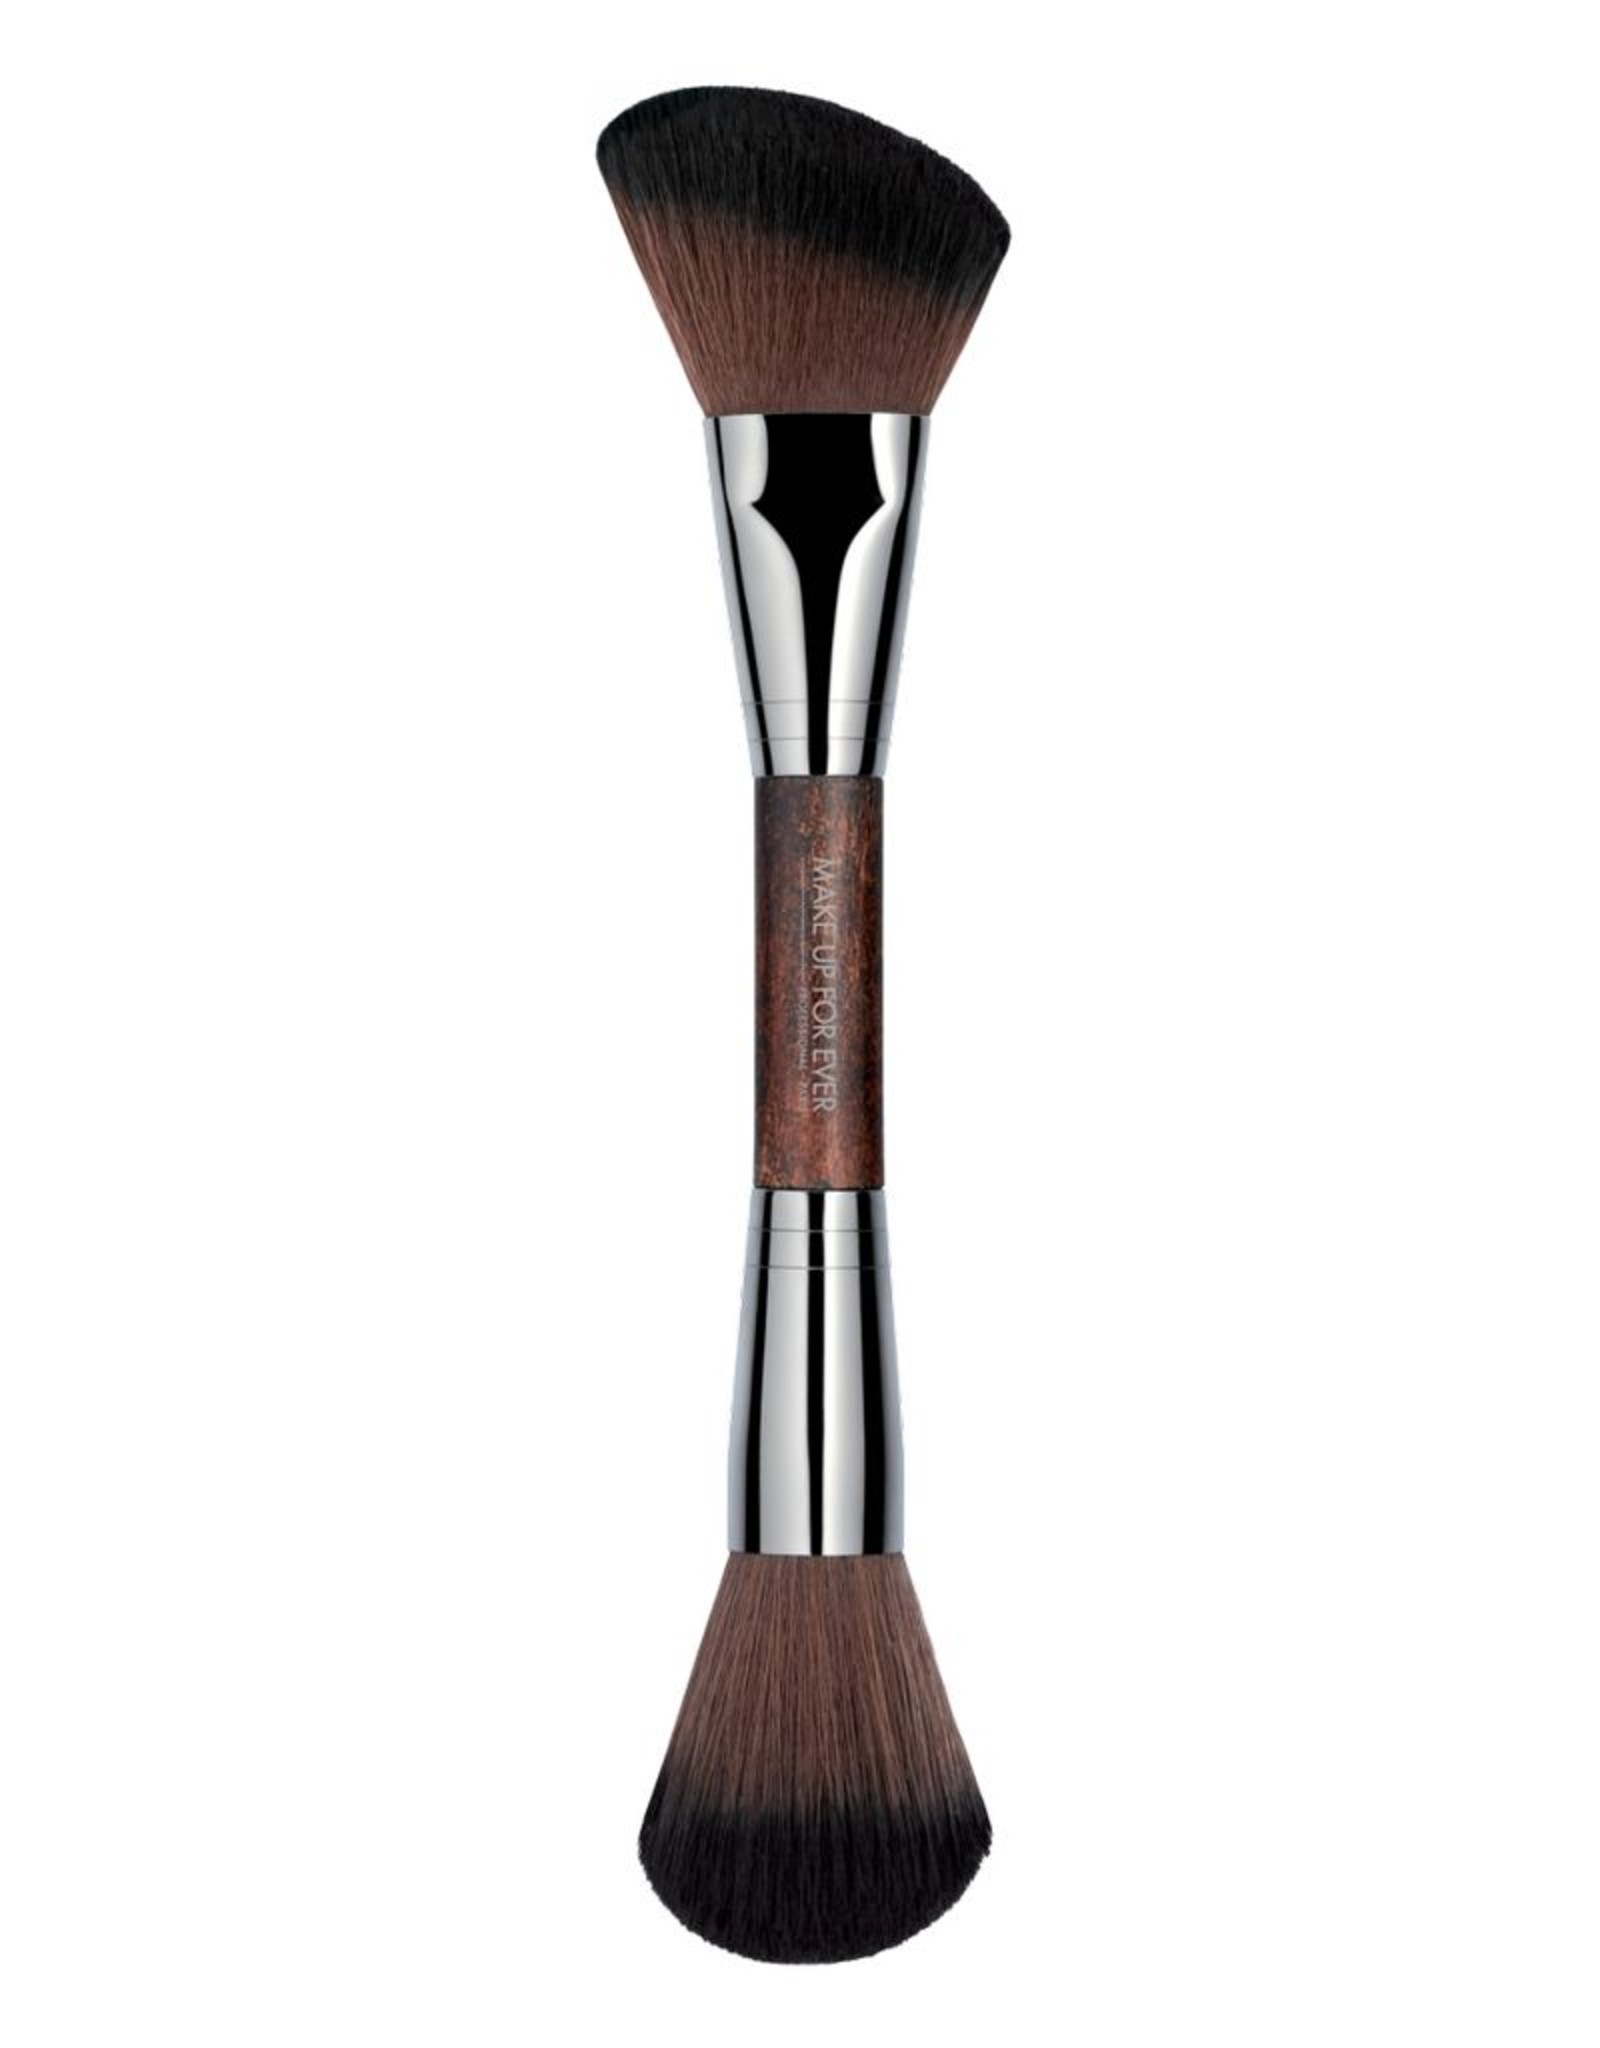 MUFE #158 PINC. SCULPTING 2-EMBOUT /  2-ENDED SCULPTING BRUSH